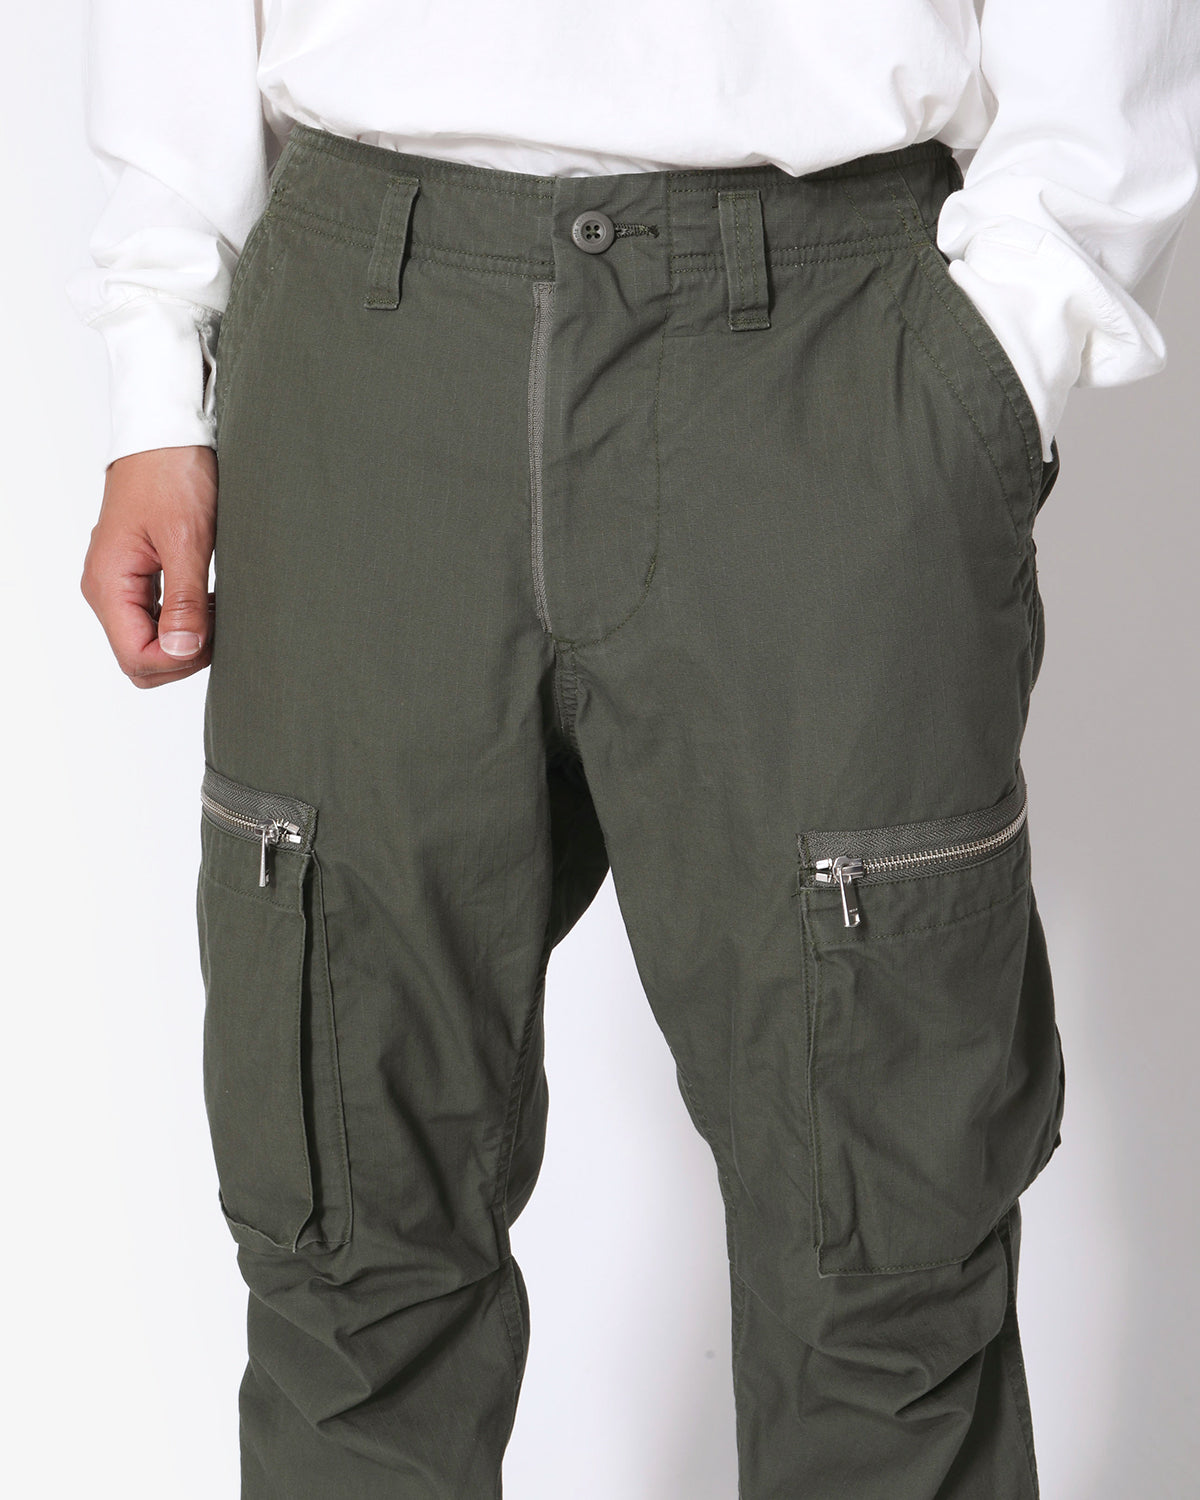 TROOPER 6P TROUSERS COTTON RIPSTOP